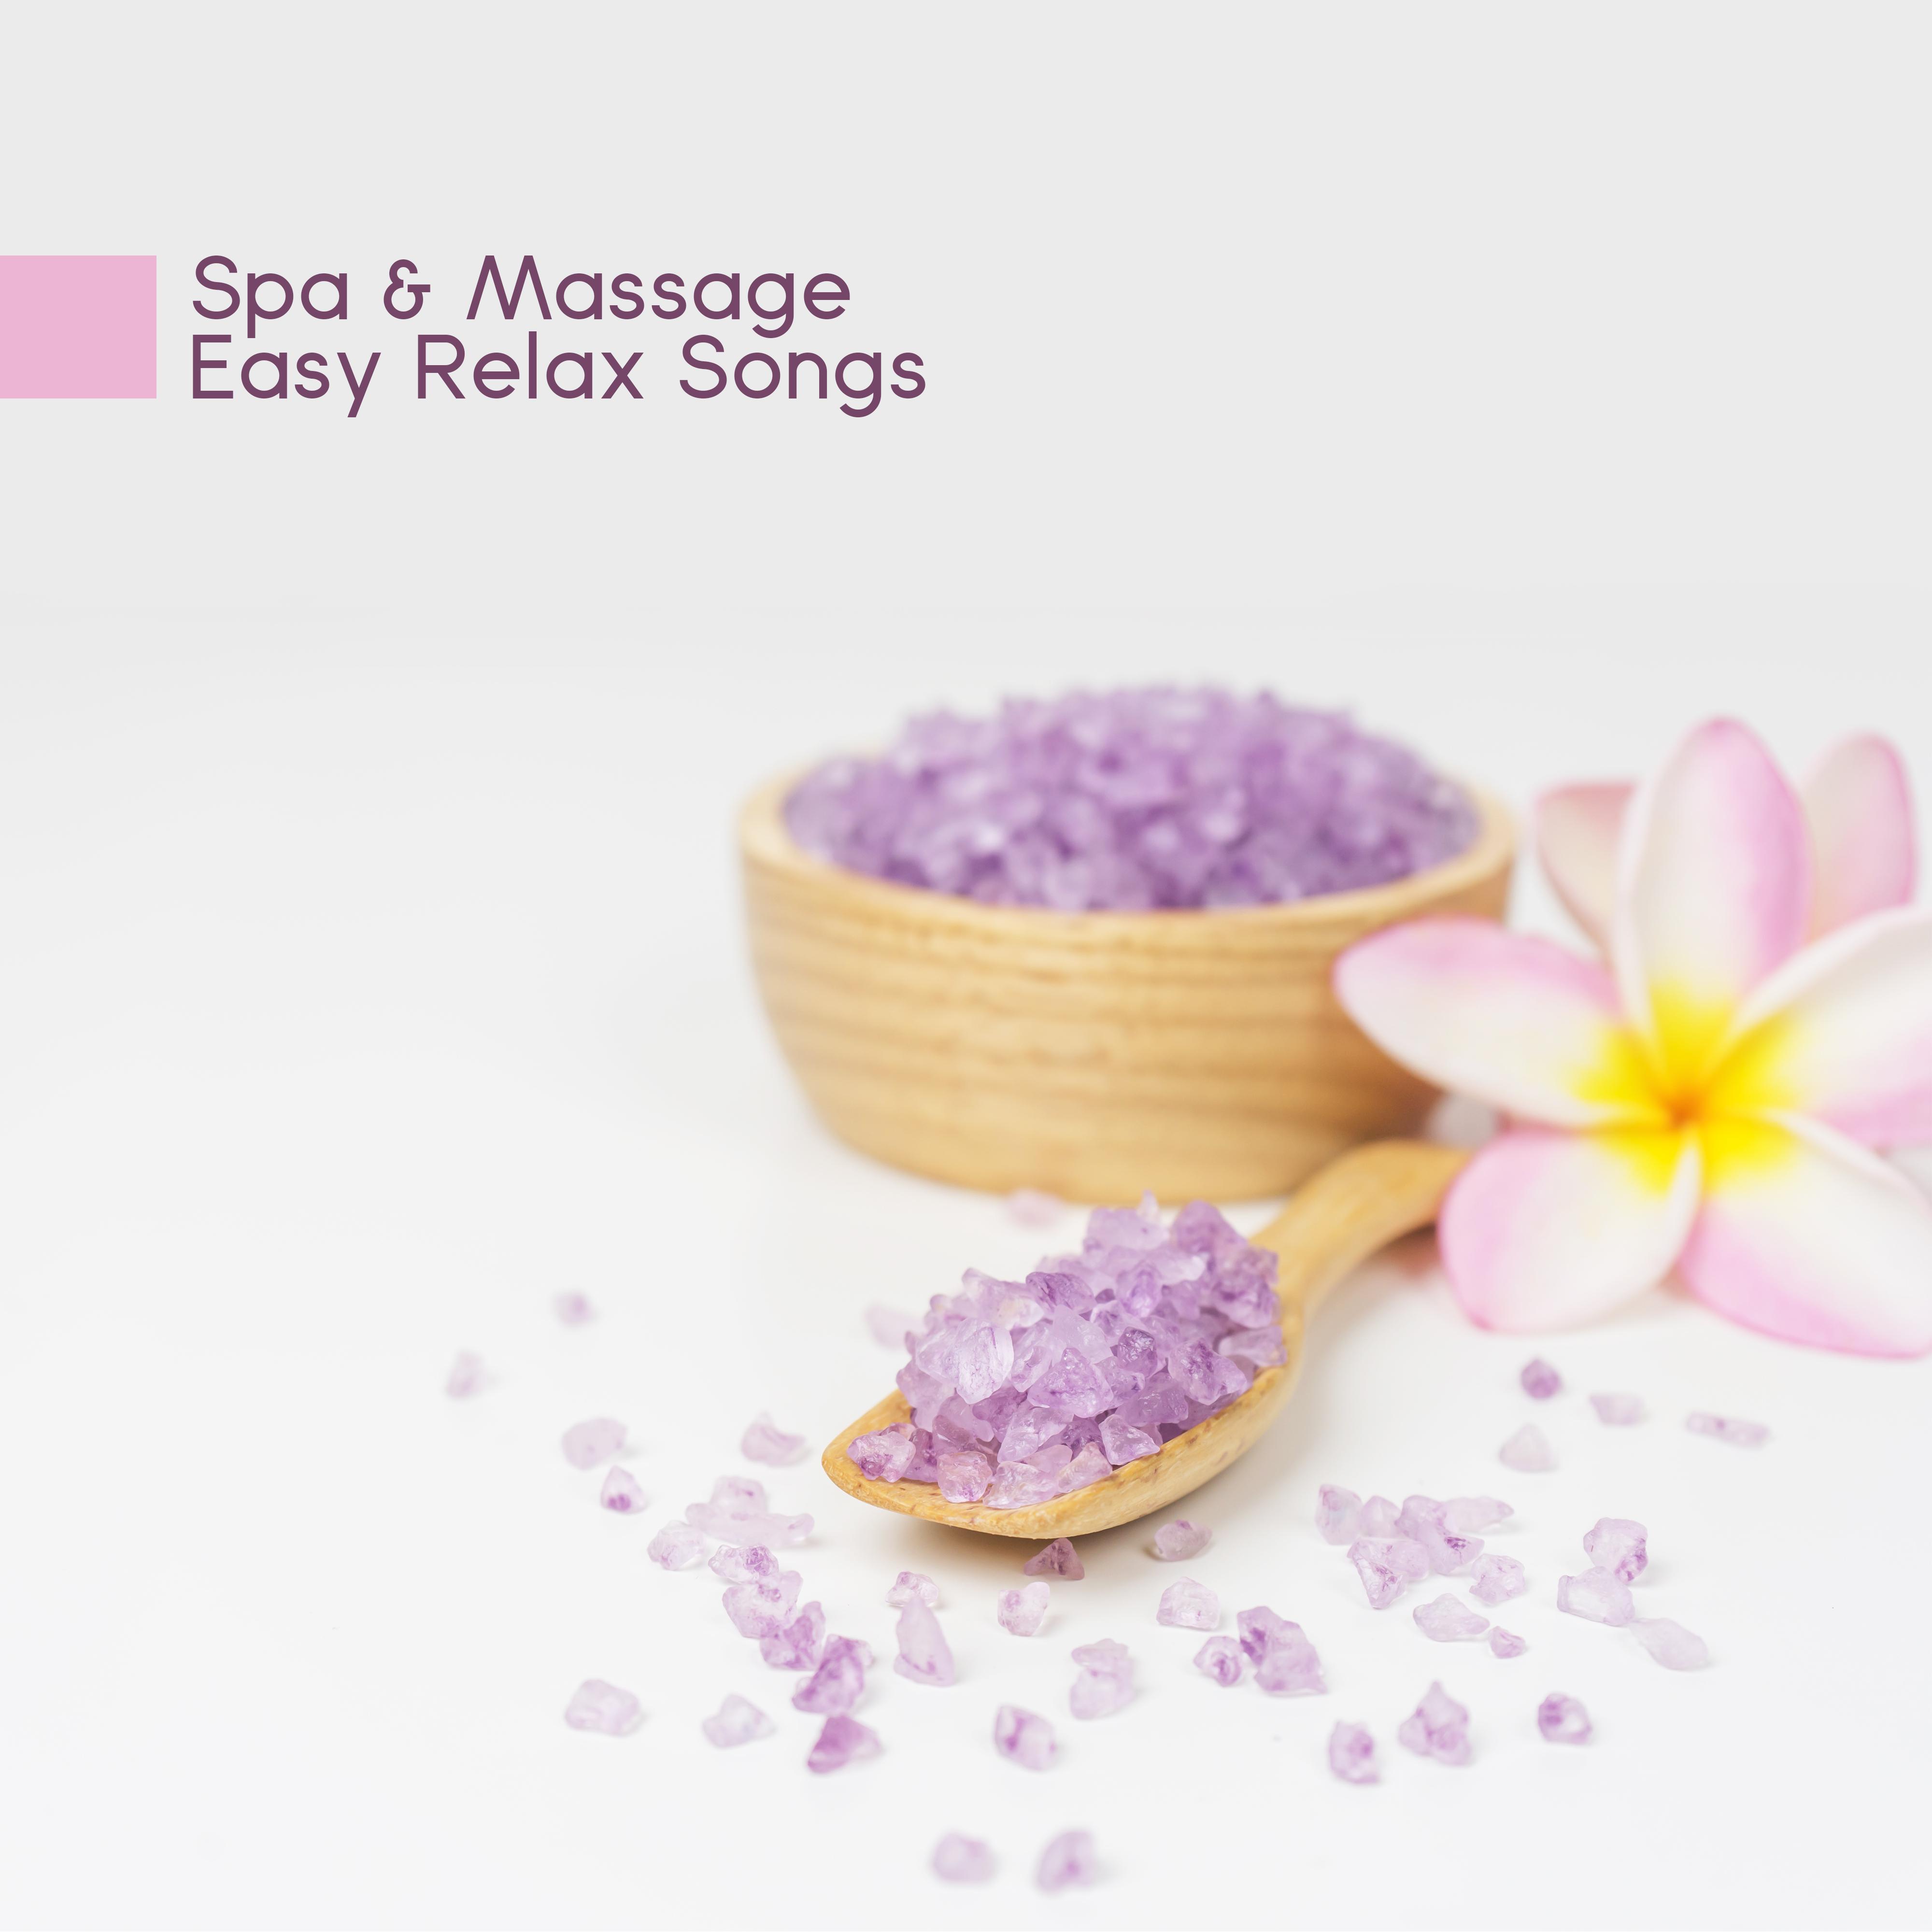 Spa & Massage Easy Relax Songs